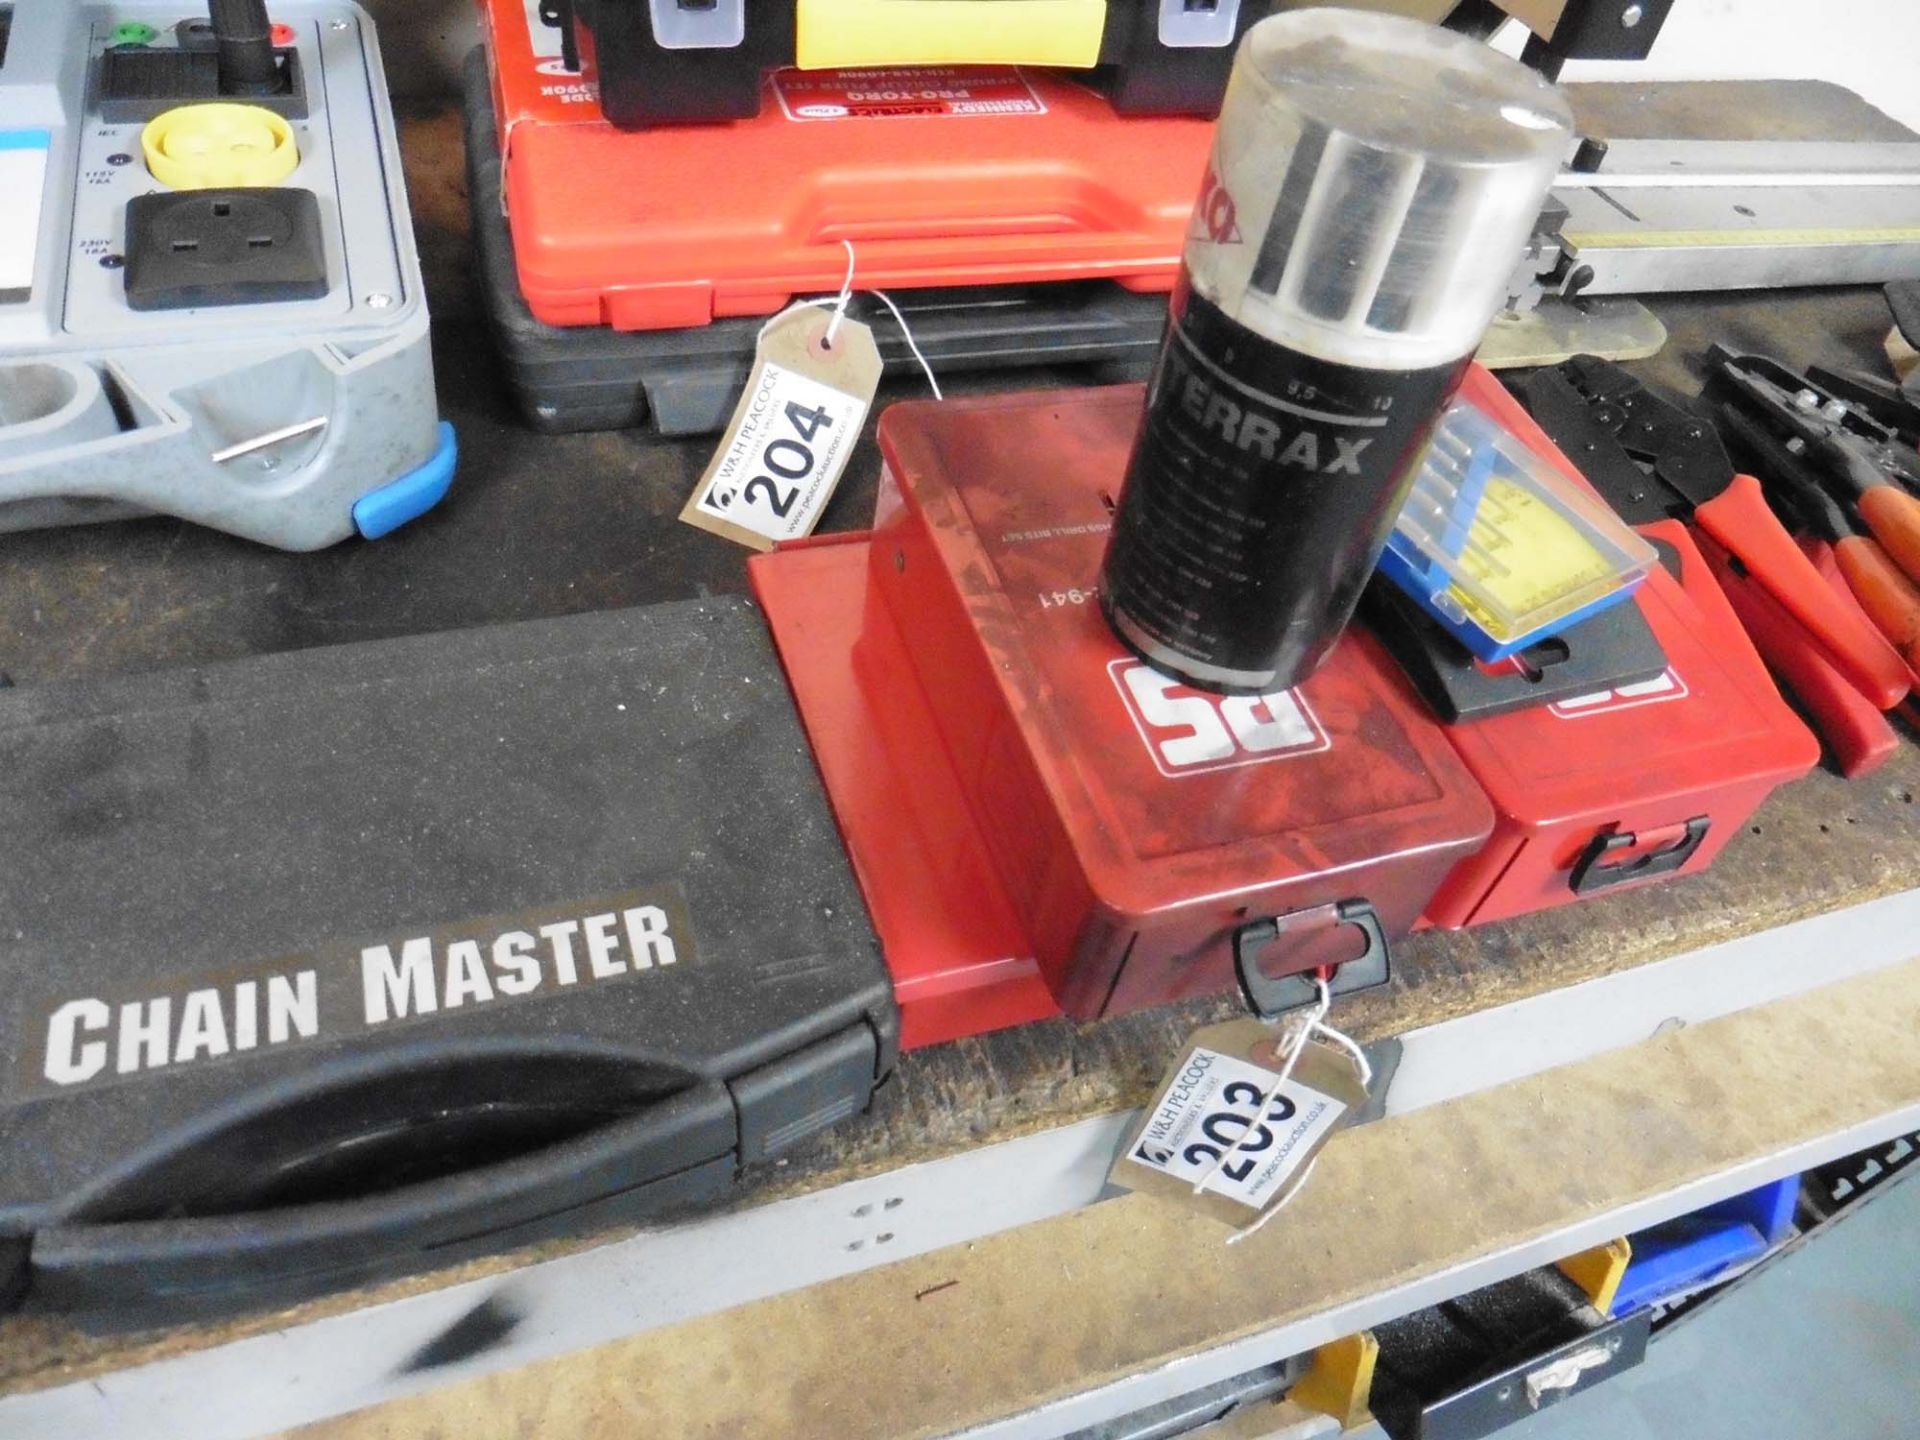 MFX 360S blind nut riveter kit, 2 RS part drill bit sets and another plus a Chainmaster press